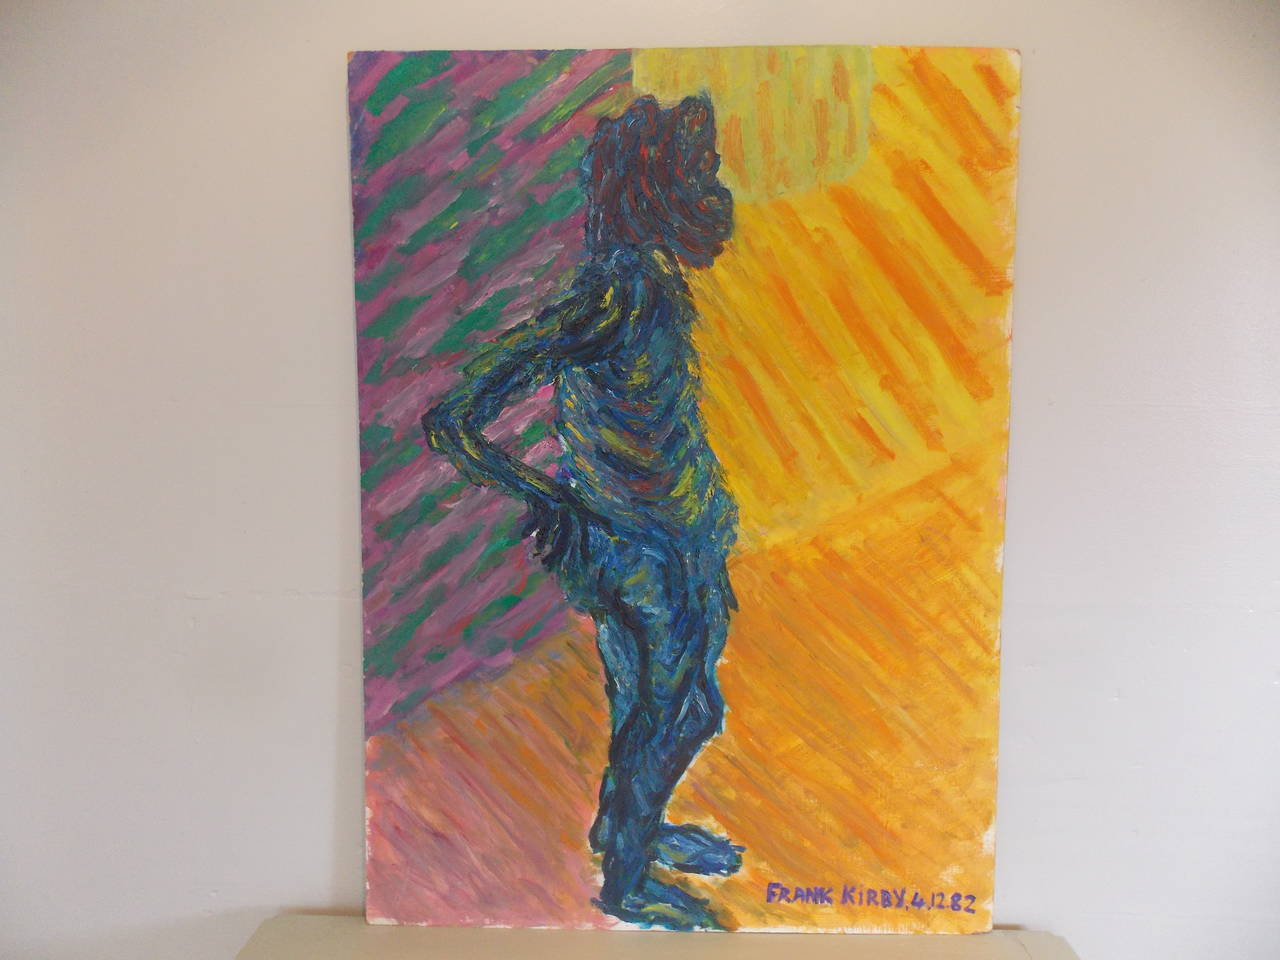 Board Abstract figurative painting by the British artist Frank Kirby c.1982 For Sale